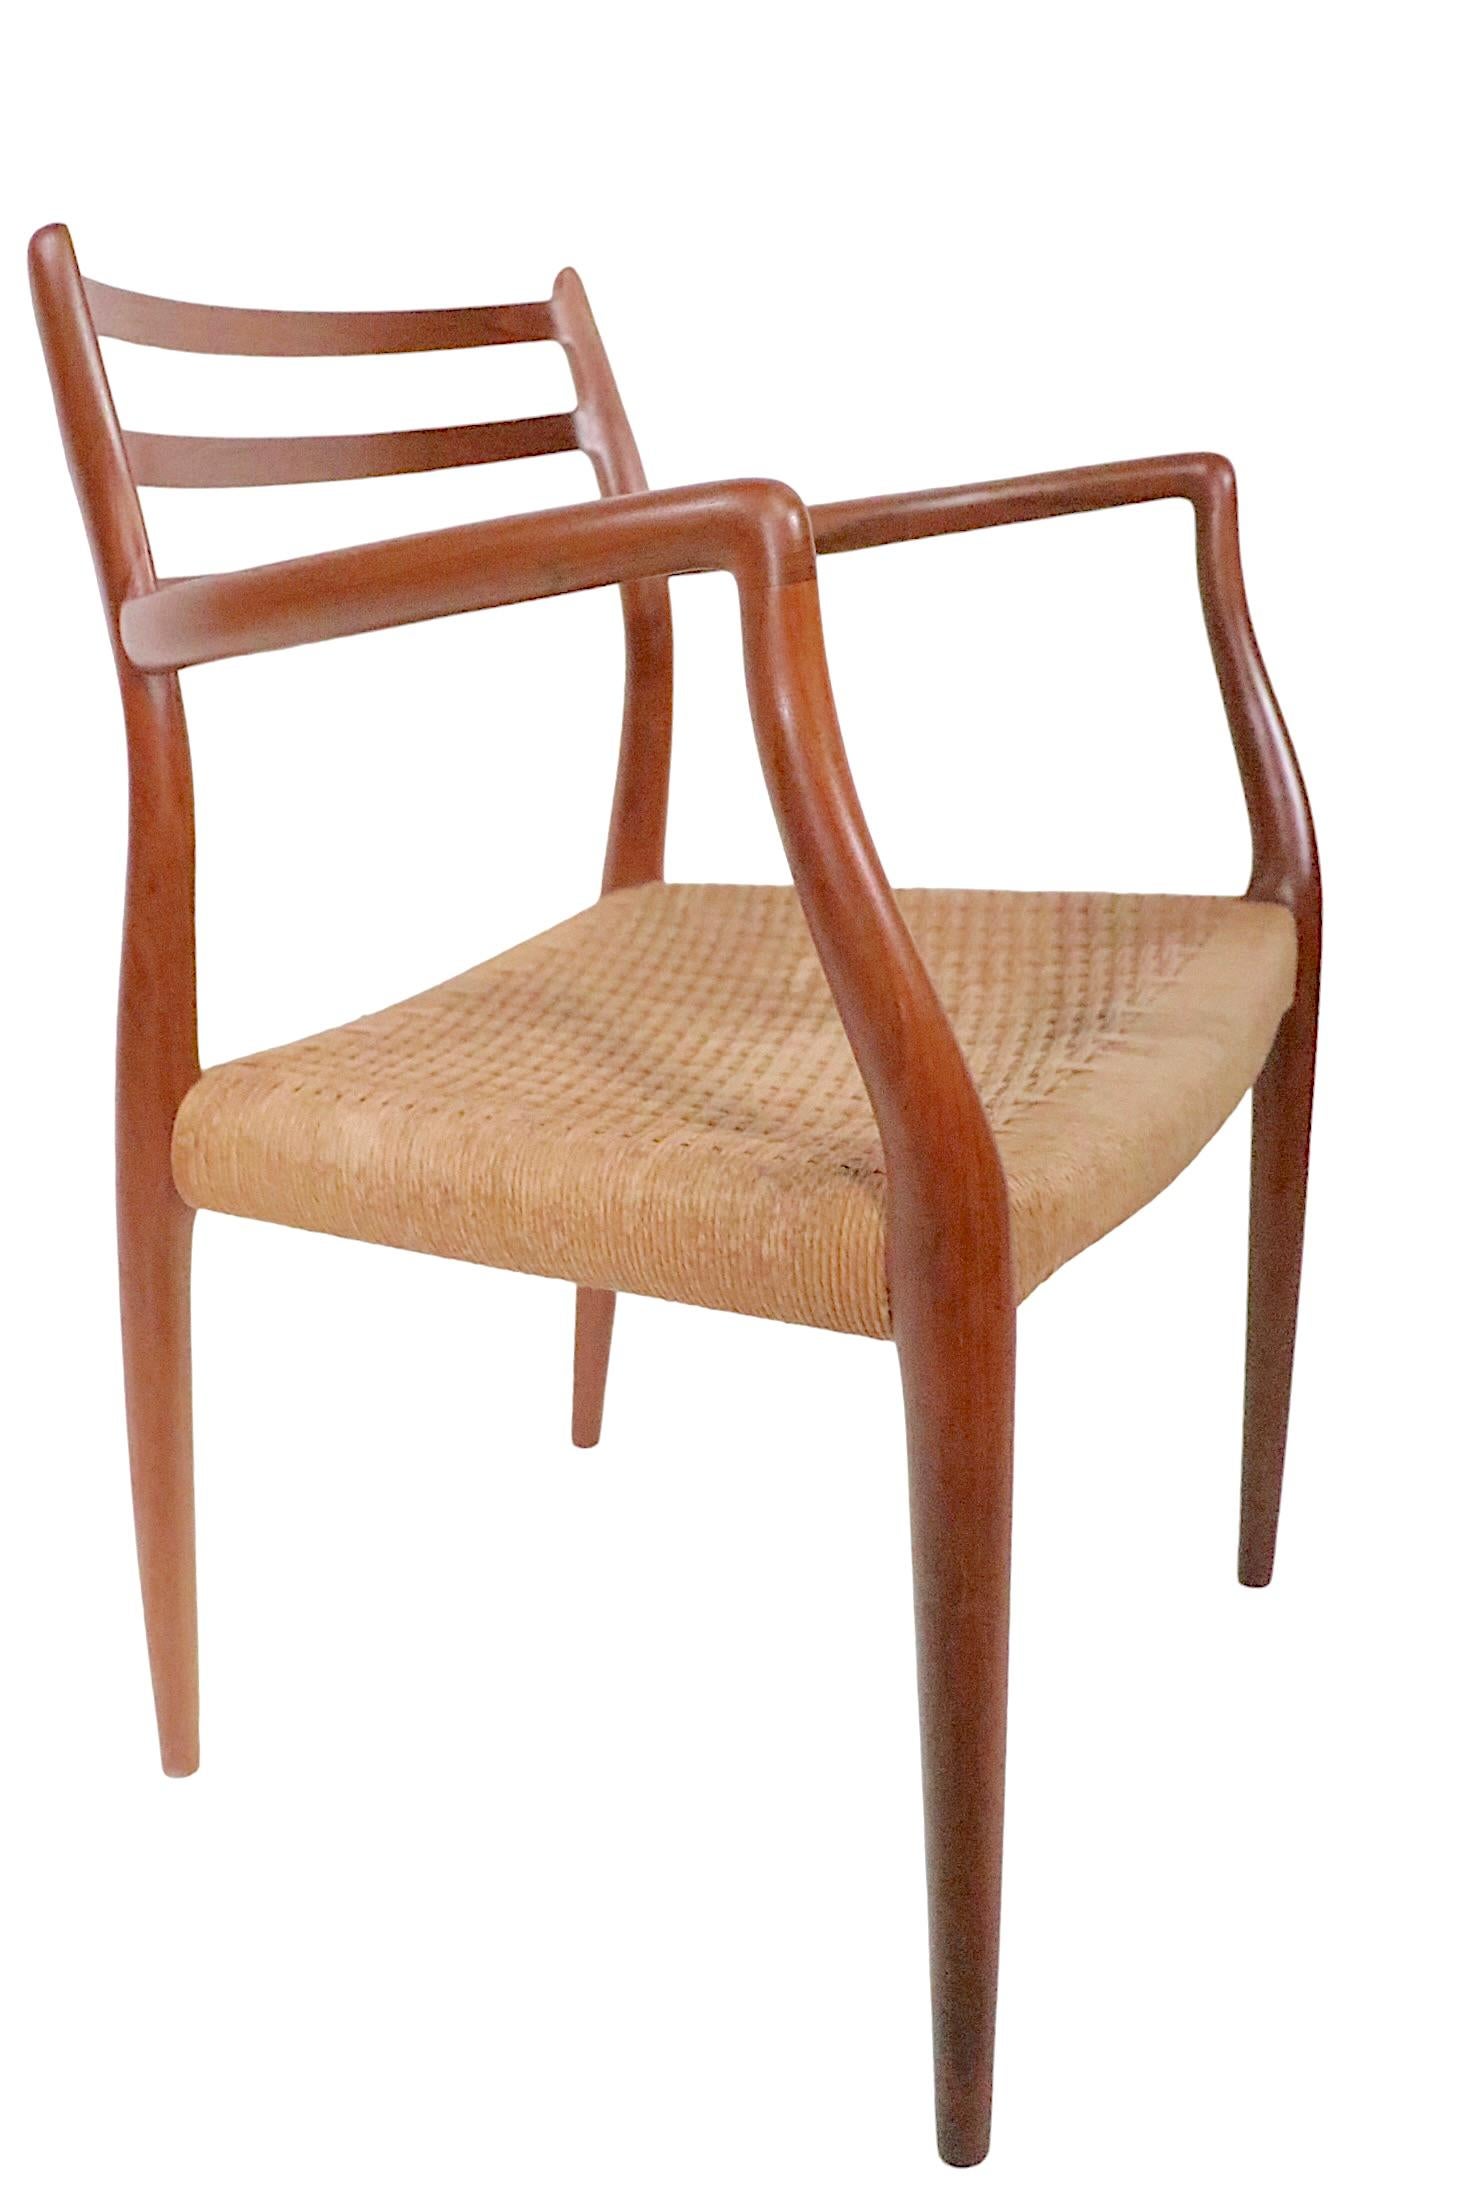 Danish Set of Eight Teak Dining Chairs by Neils Moller / J.L.Moller, circa 1960s For Sale 8